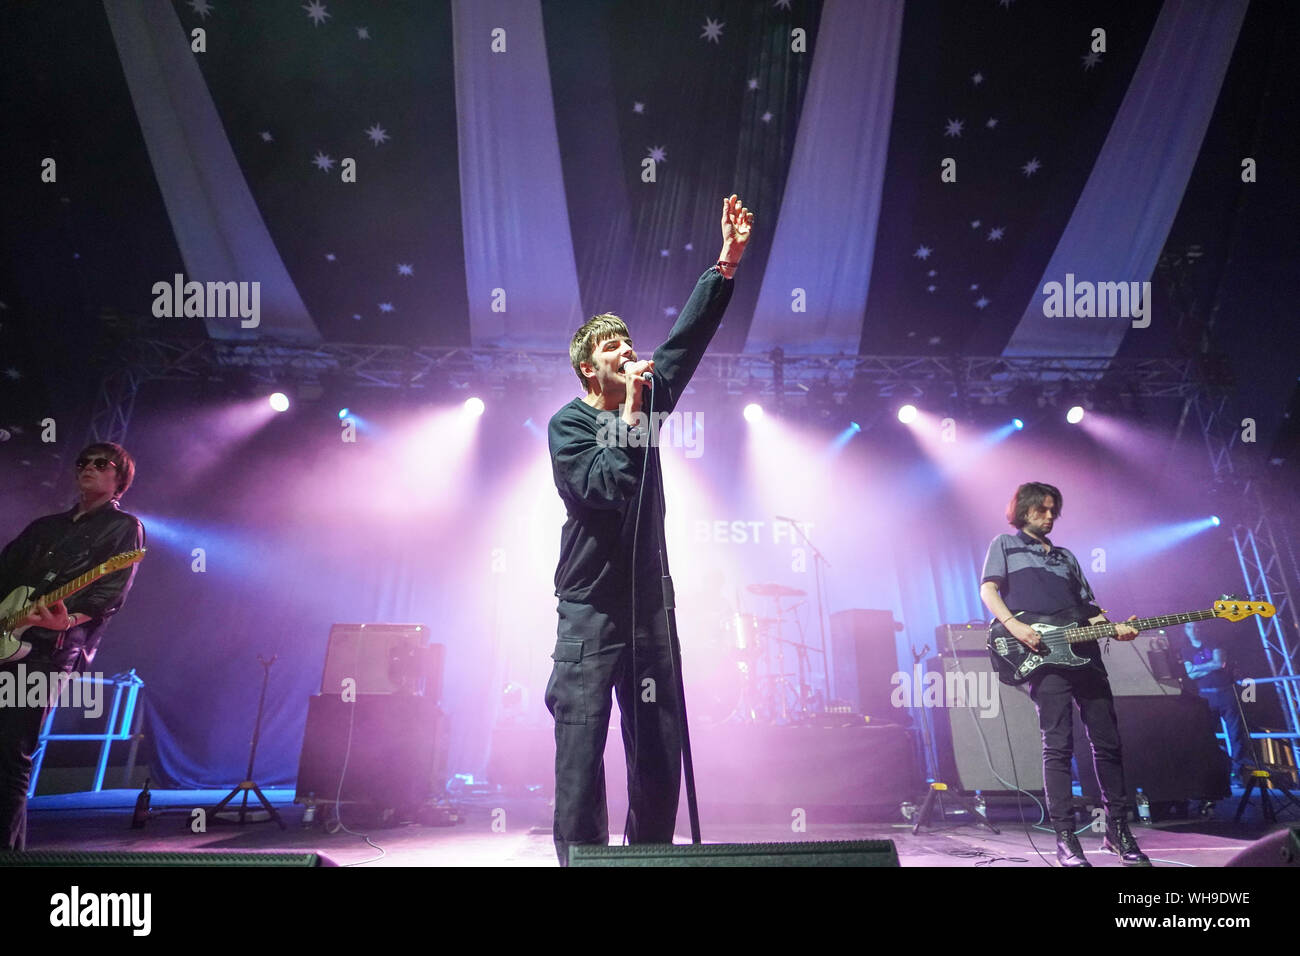 Larmer Tree Gardens, Dorset, UK. Sunday, 1 September, 2019. Fontaines DC performing at the 2019 End of the Road Festival. Photo: Roger Garfield/Alamy Live News Stock Photo